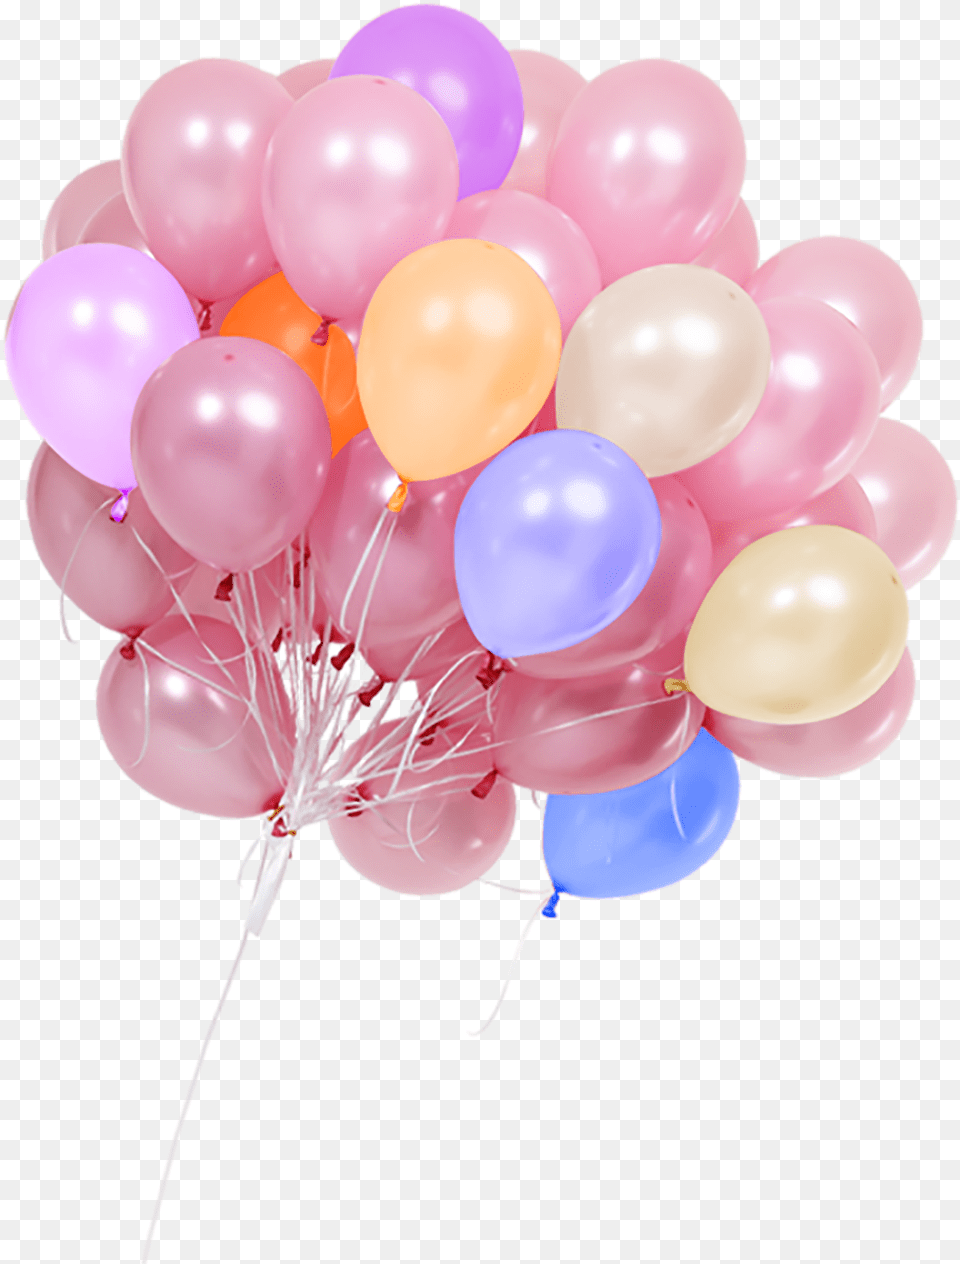 Balloon Images And Clipart With Alfa Transparent Background Real Balloons Transparent Background Png Image